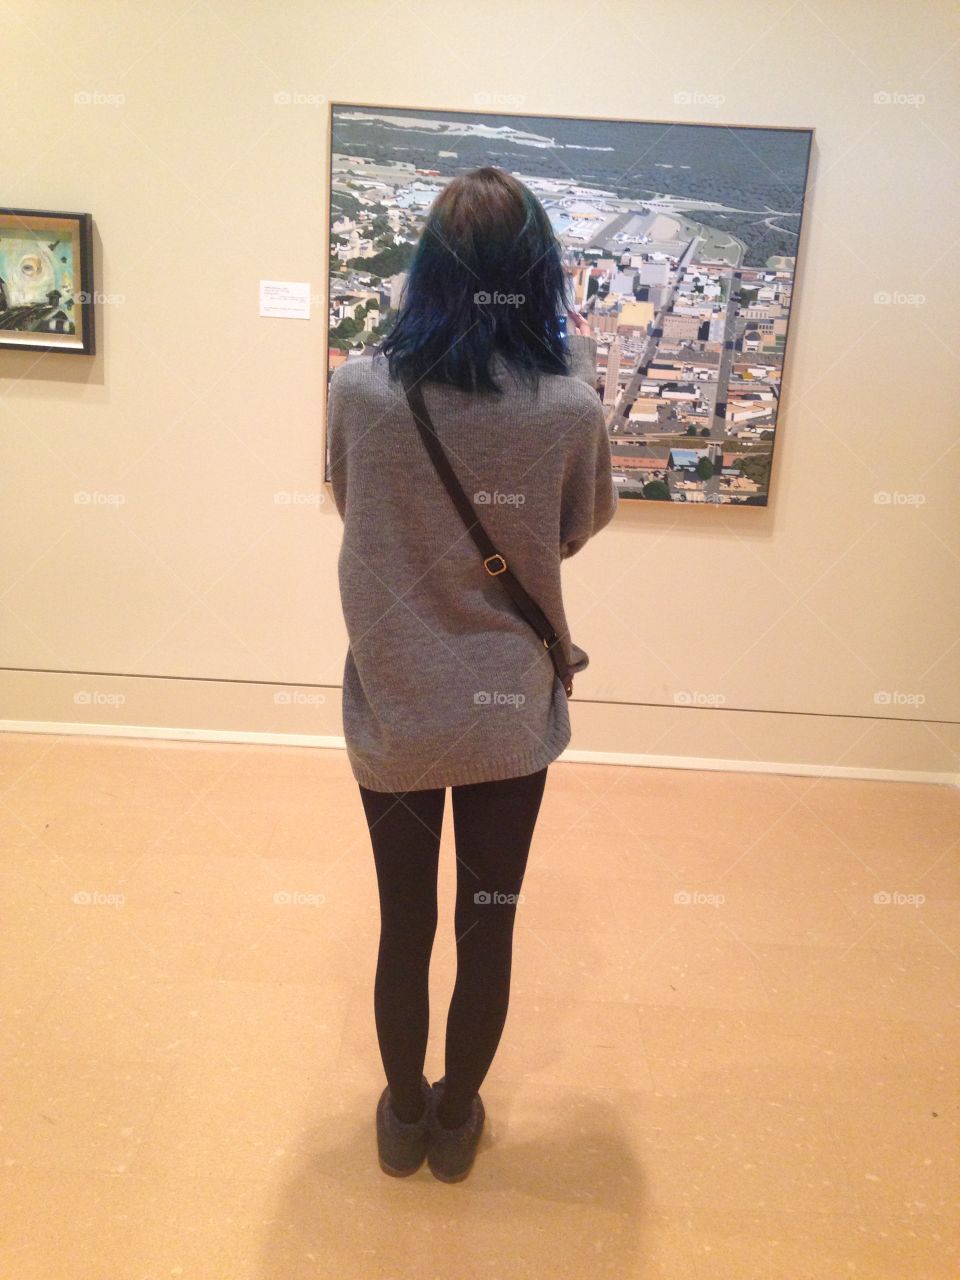 checking out the art!